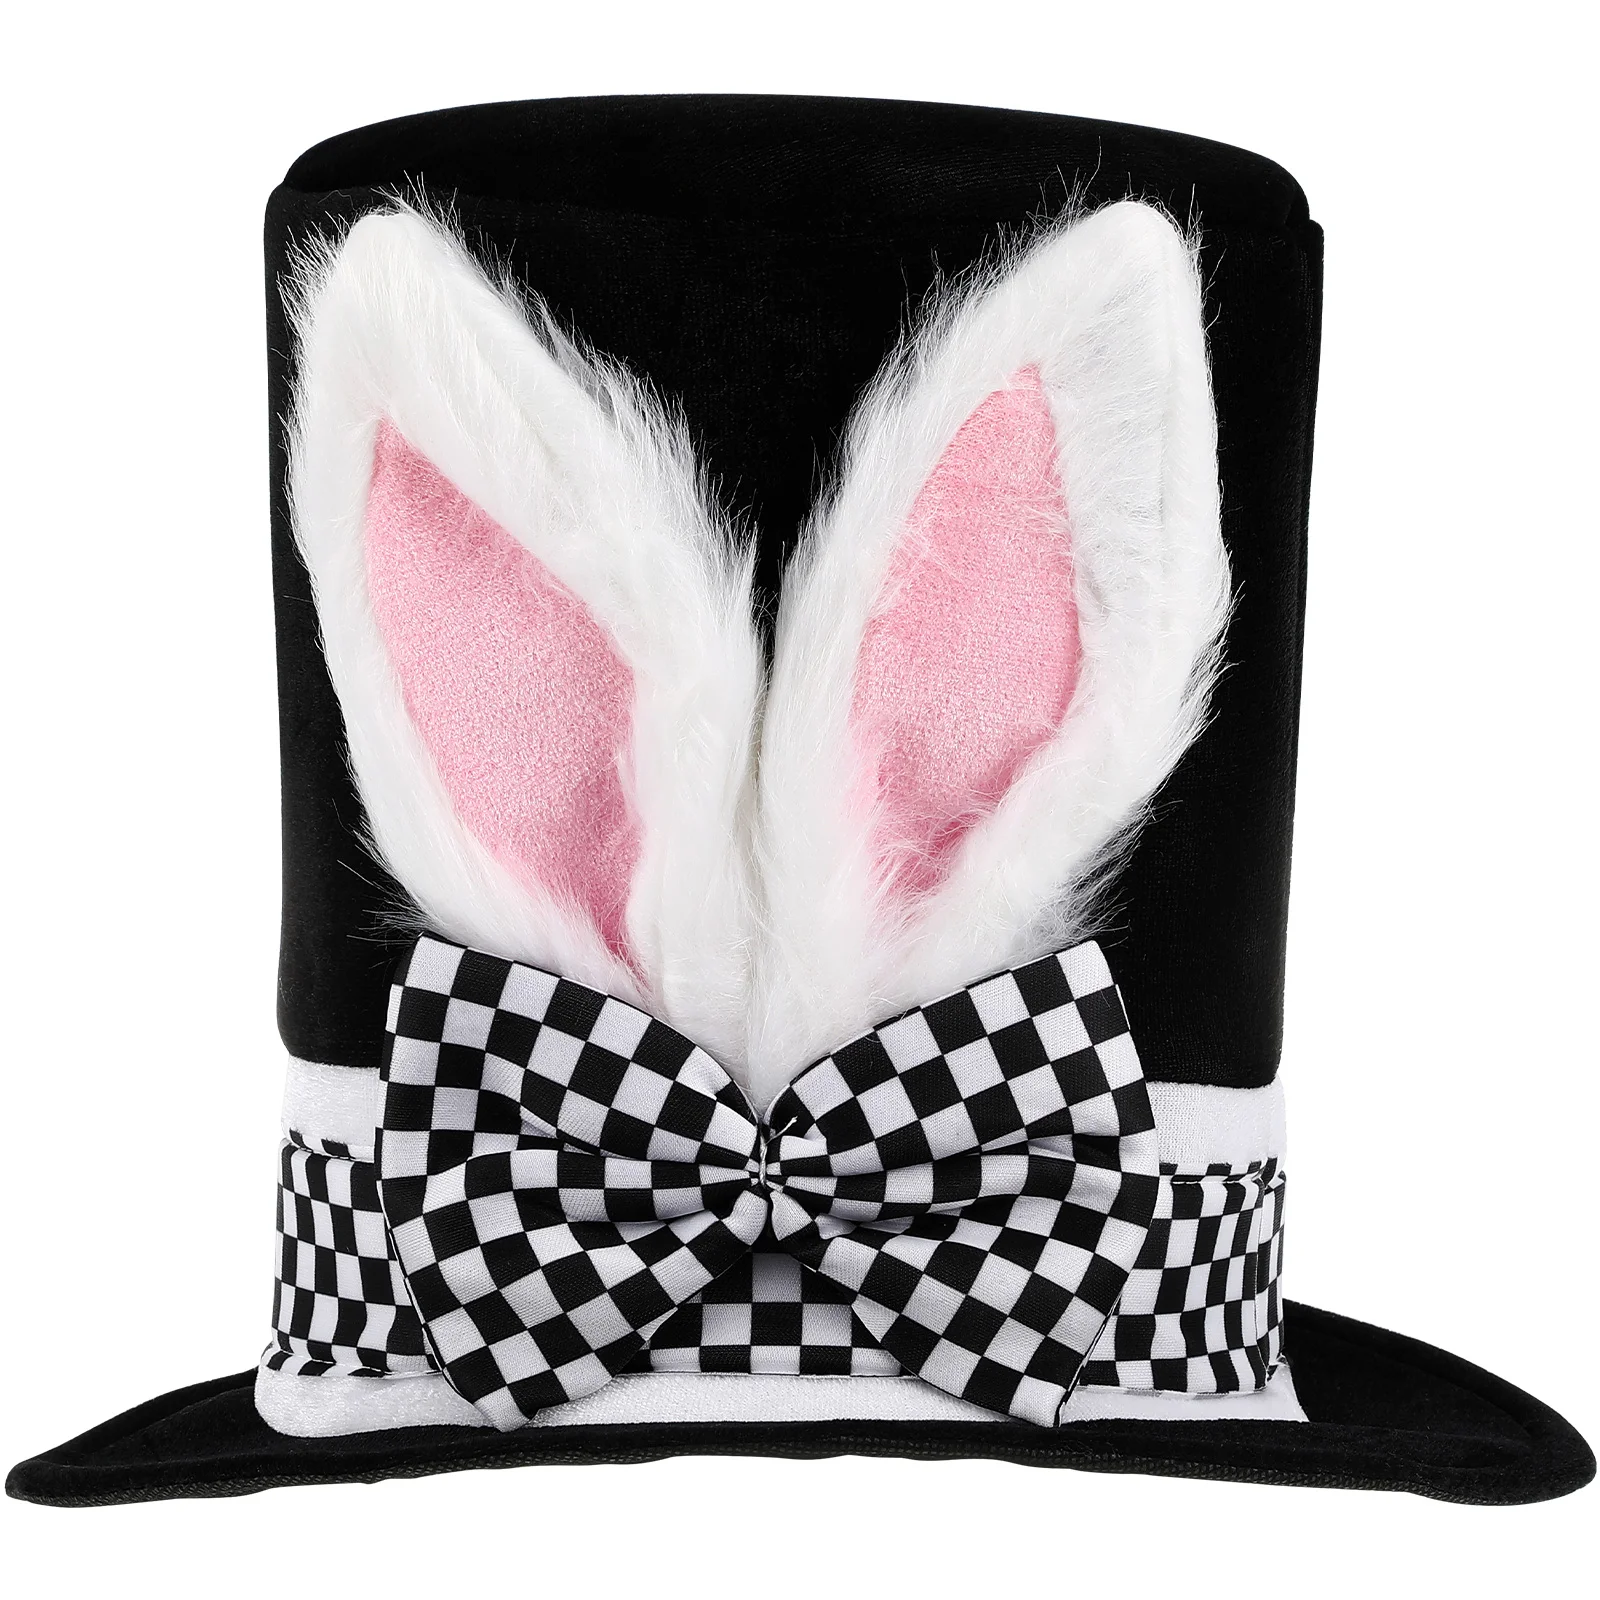 

Hat Costume Easter Bunny Rabbitwhite Hats Womenadult Plush Ears Men Bonnet Ear Fairy Party Cosplay Costumes Accessories Black